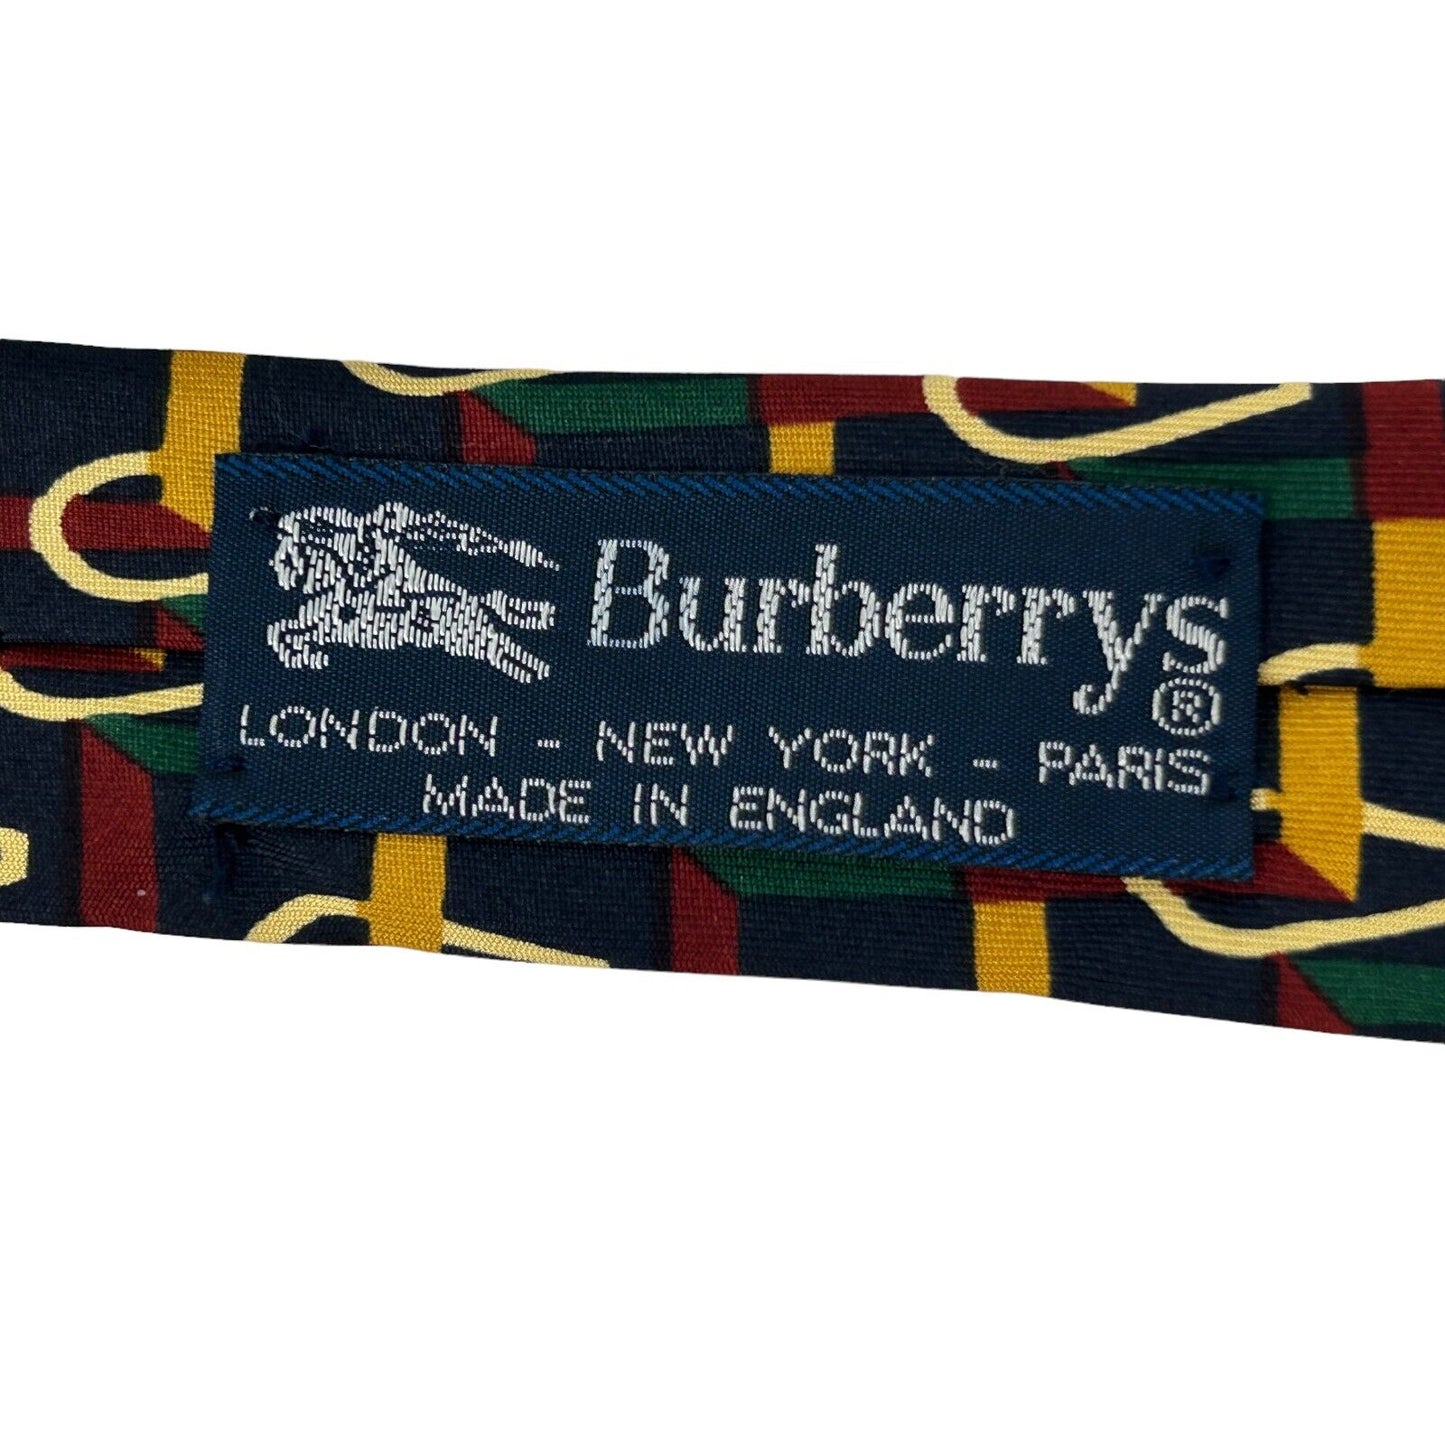 Burberry Mens Tie Necktie Blue Gold Red Green Geometric Silk Made In England